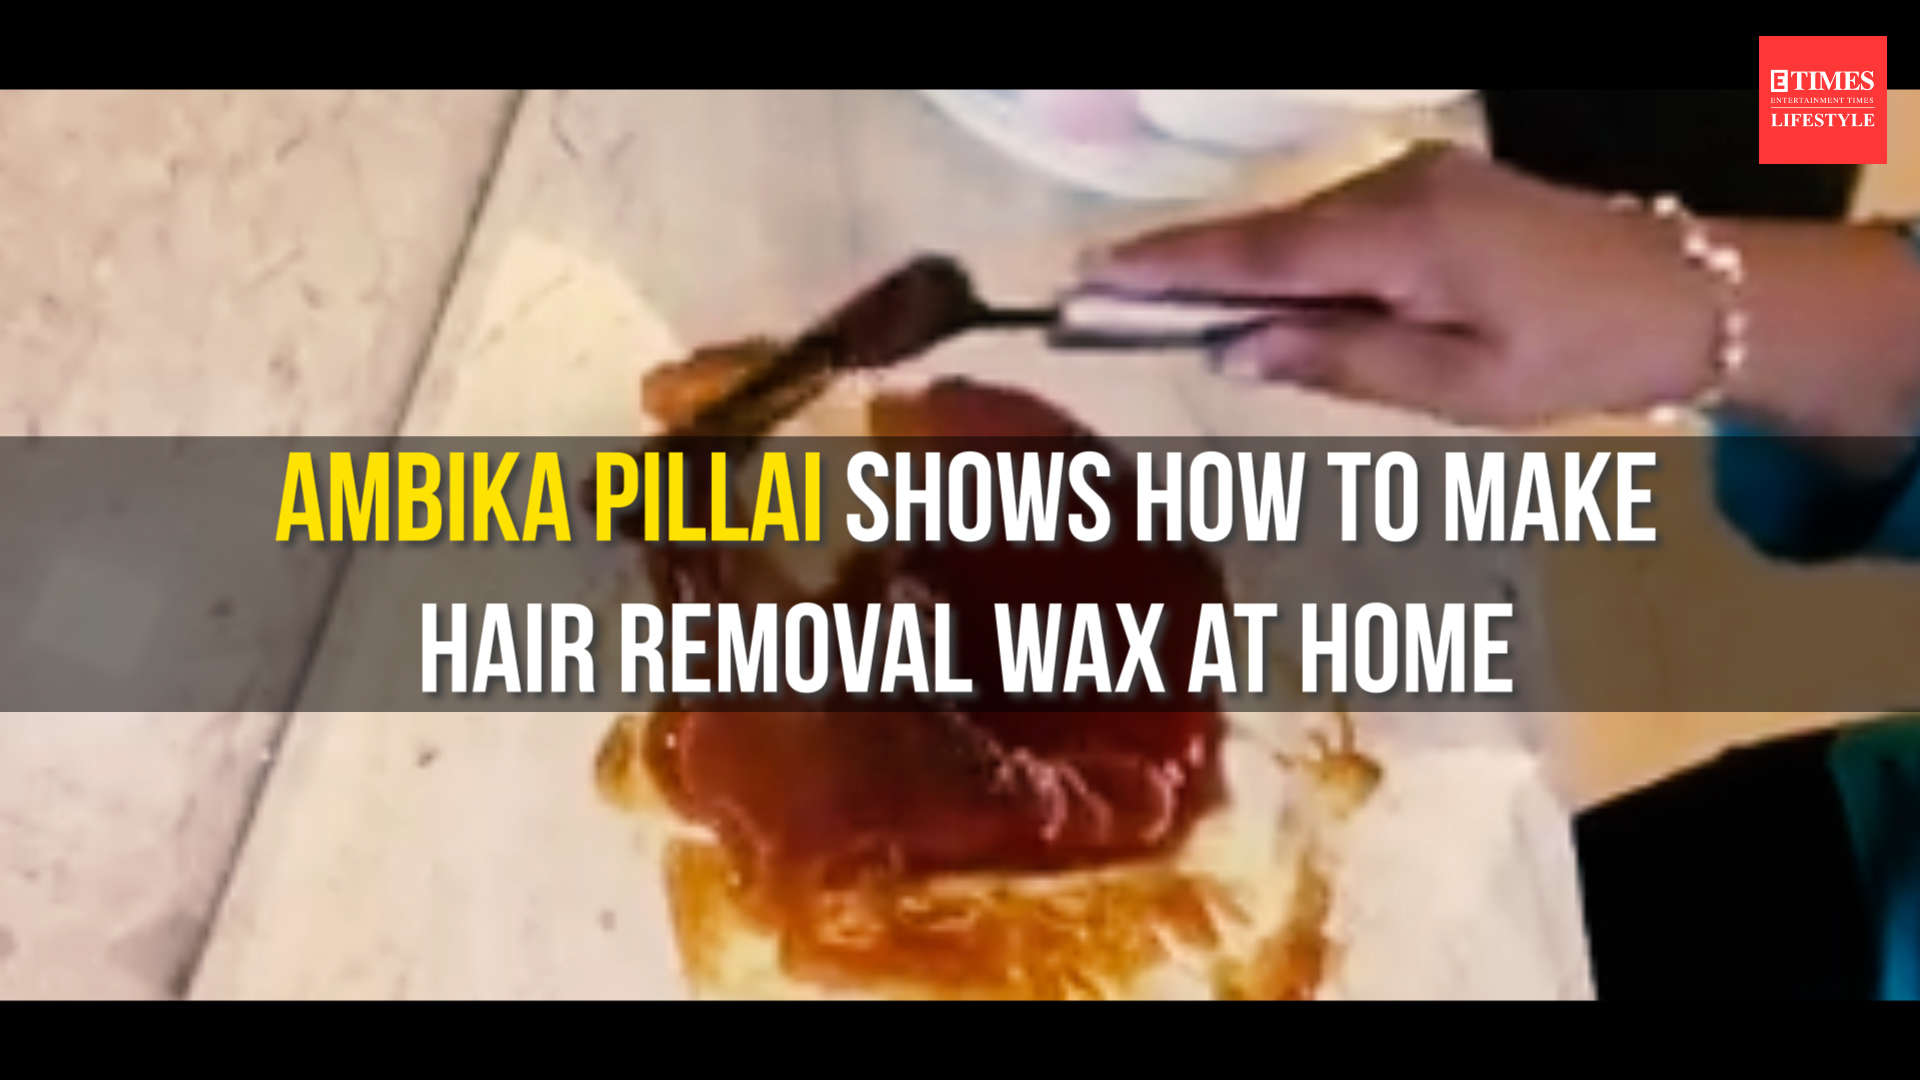 Ambika Pillai shows how to make hair removal wax at home | Lifestyle -  Times of India Videos